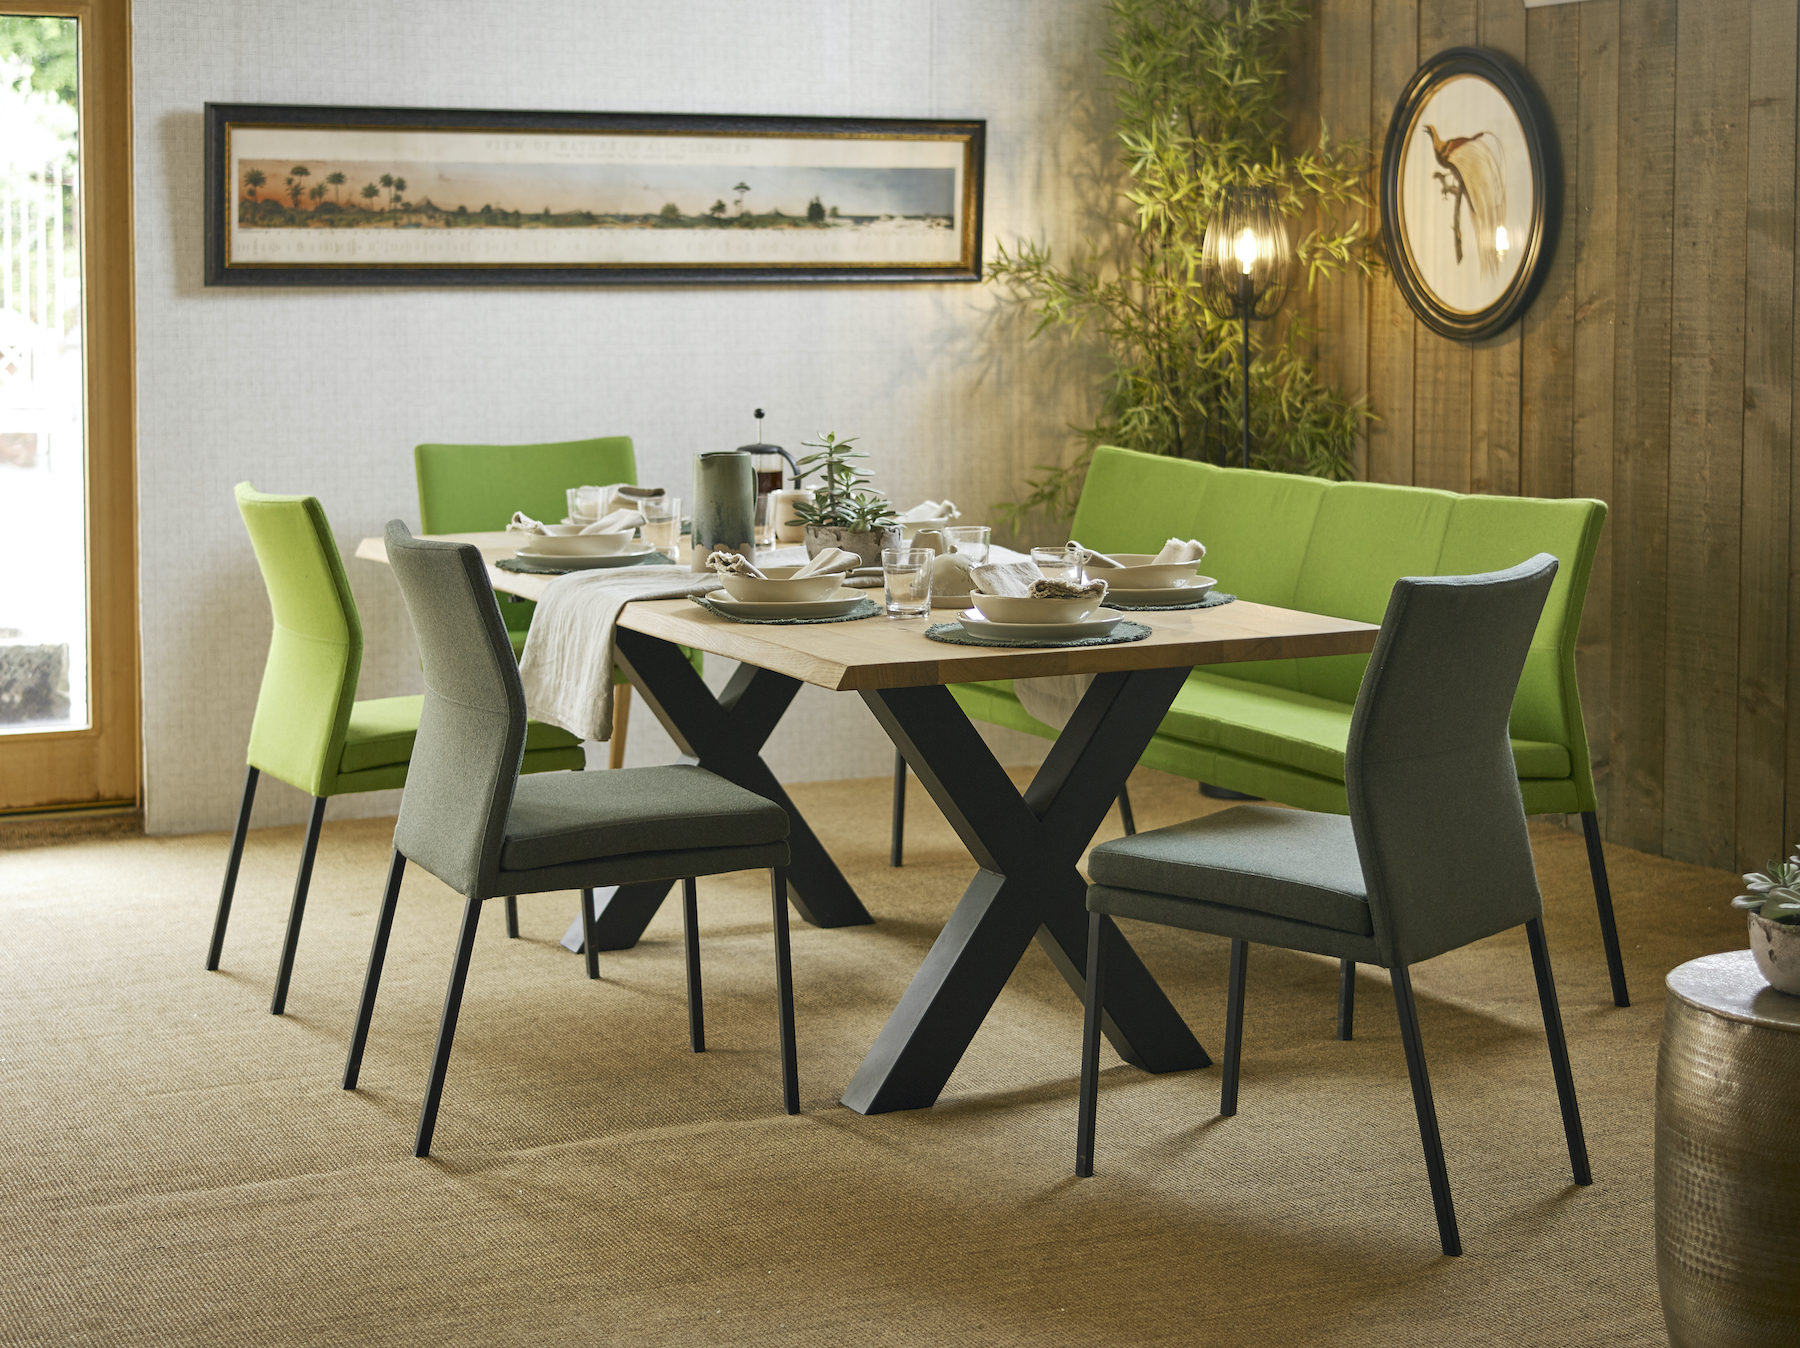 Derwent dining table with Thames dining chairs